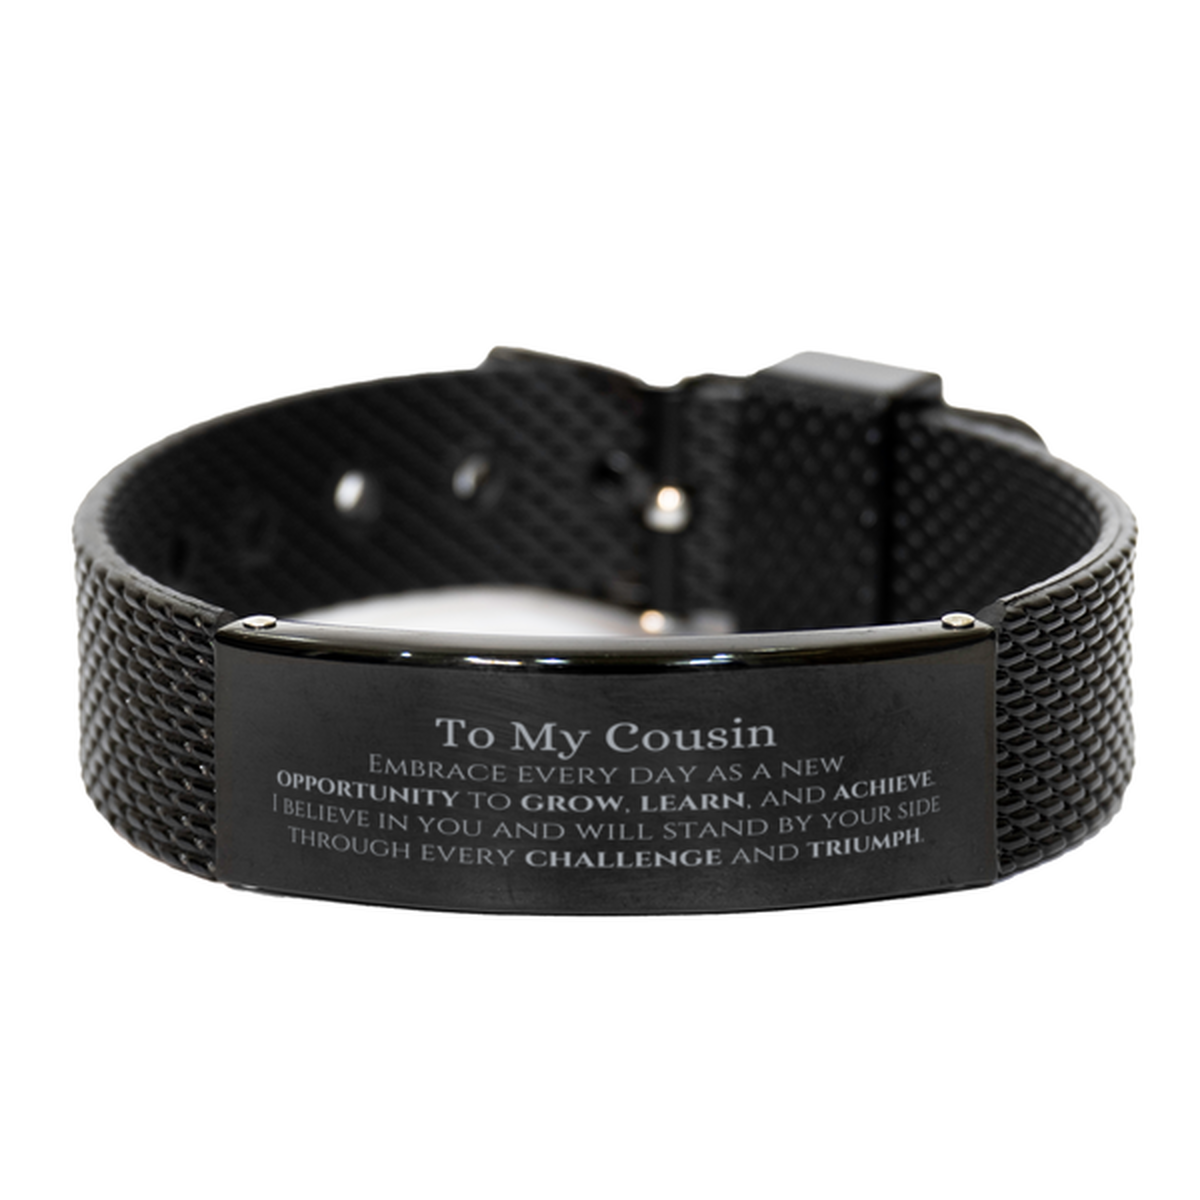 To My Cousin Gifts, I believe in you and will stand by your side, Inspirational Black Shark Mesh Bracelet For Cousin, Birthday Christmas Motivational Cousin Gifts